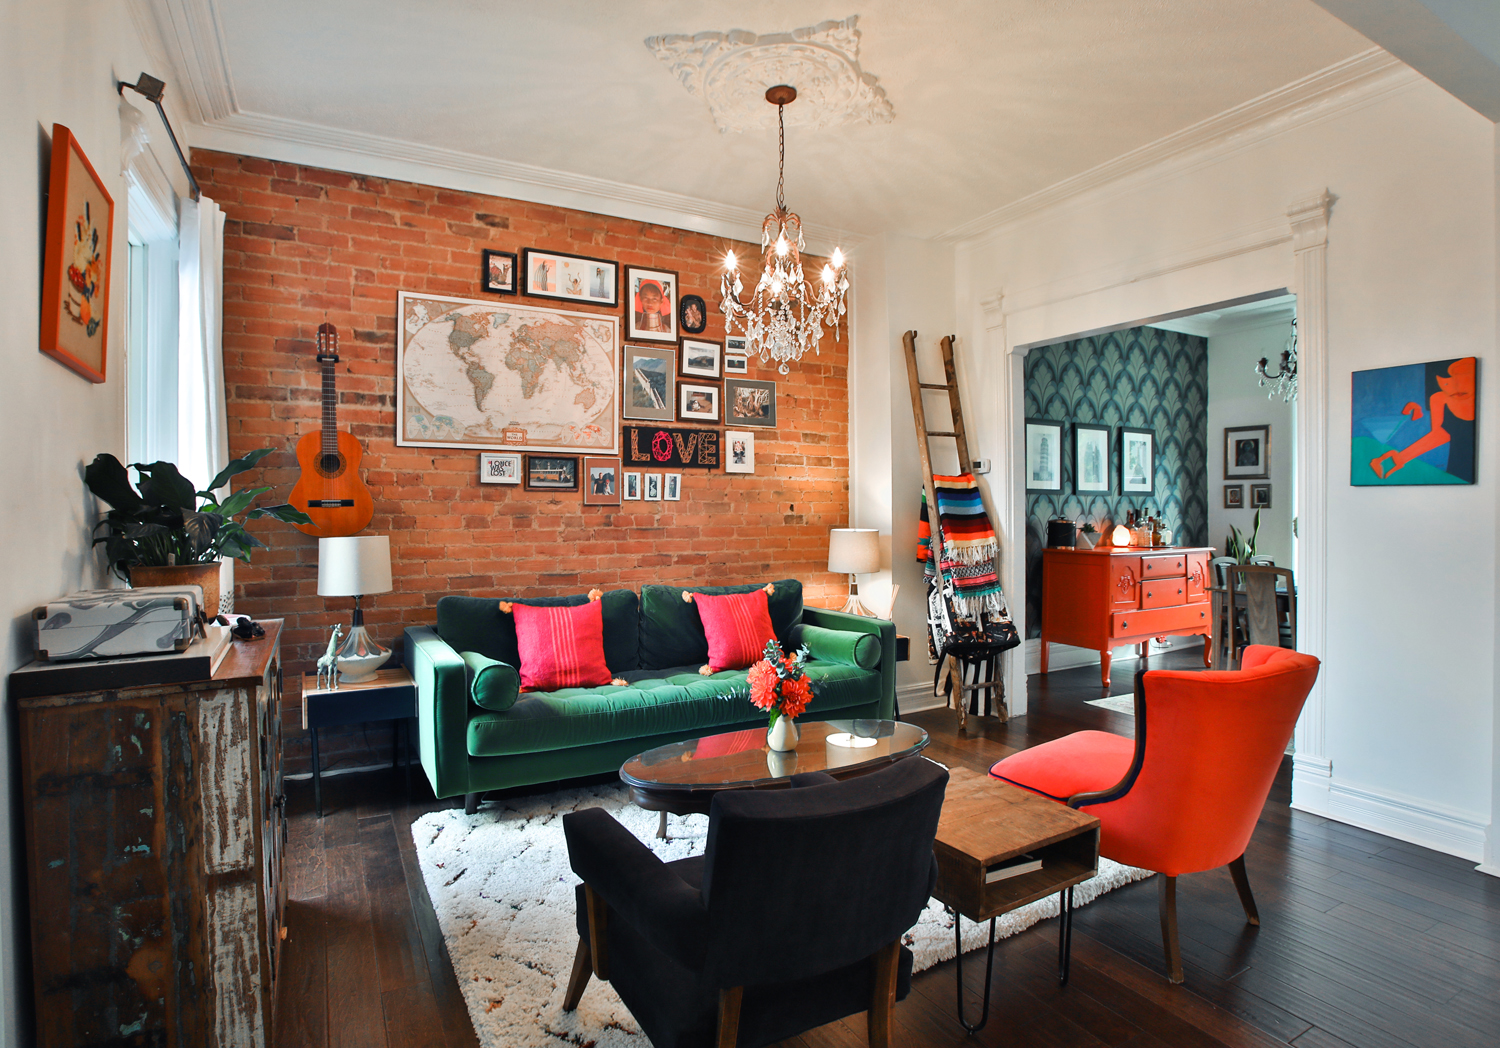 Eclectic design style